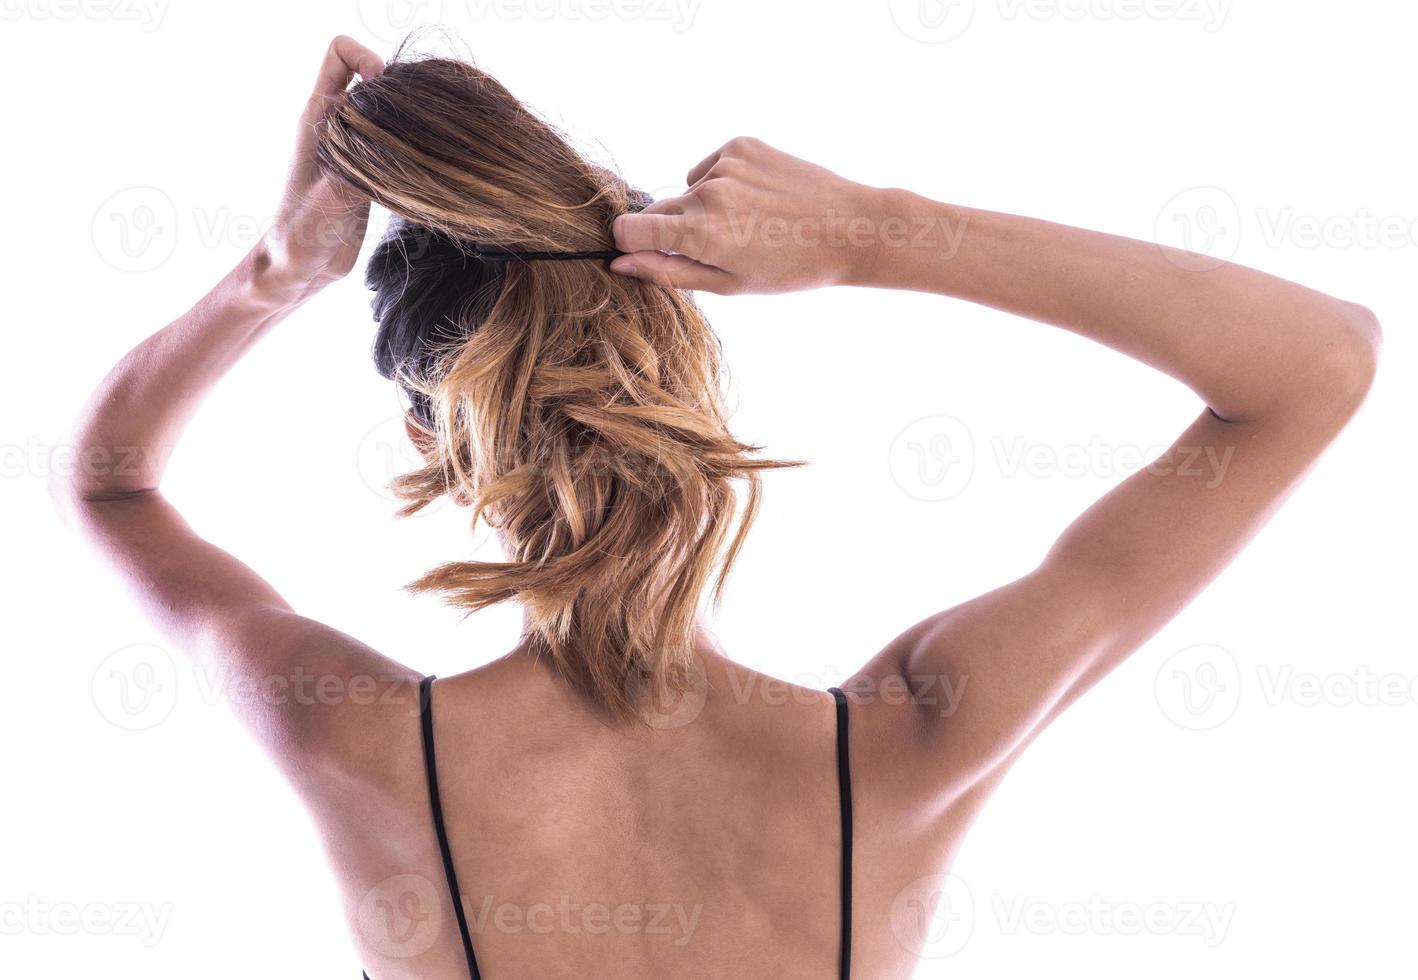 emale holding messy damaged dry hair in hands. photo